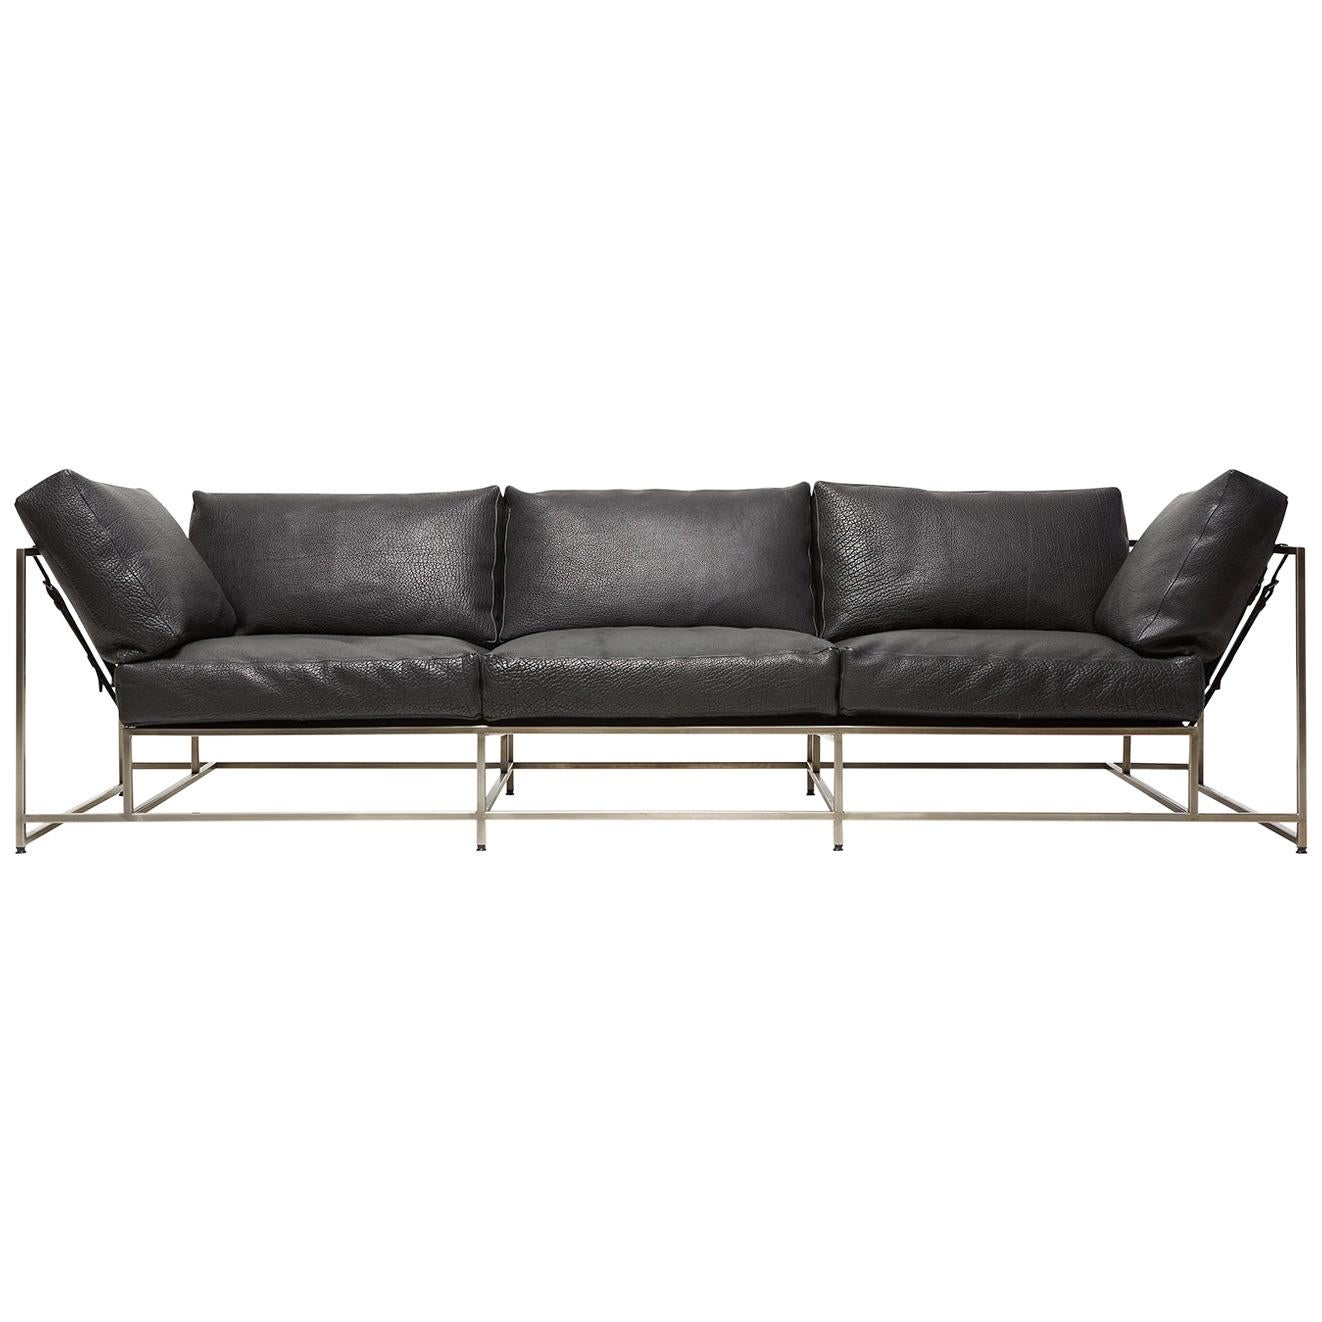 Black Bison Leather and Antique Nickel Sofa